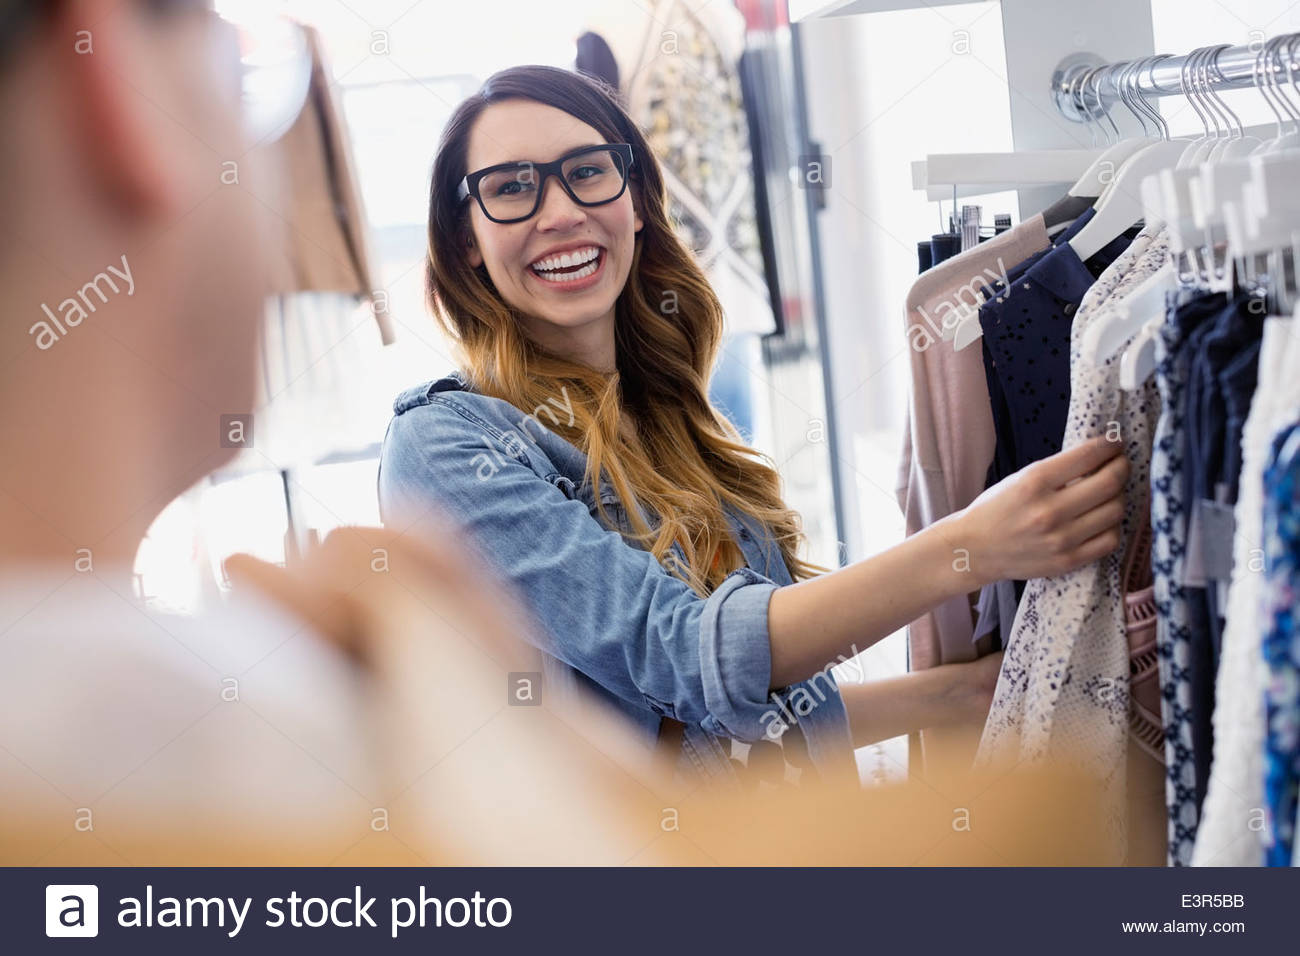 Couple shopping in clothing store Stock Photo